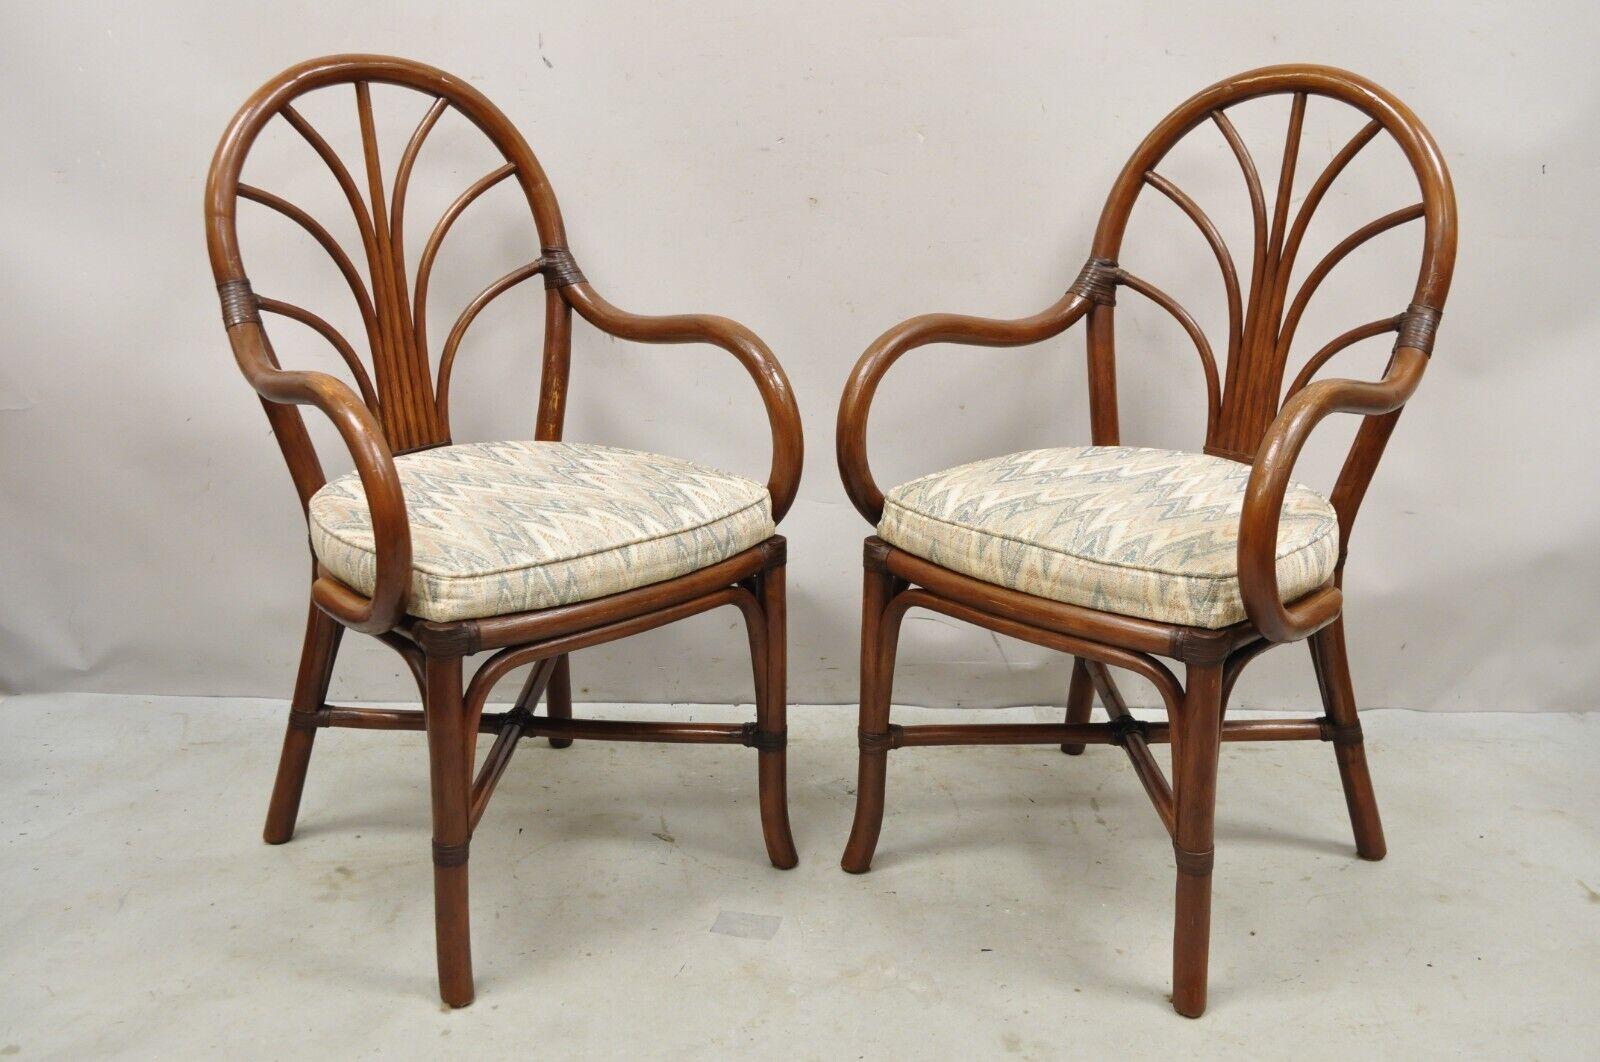 Vintage Bentwood Rattan Hollywood Regency Fan Back Dining Chairs - Set of 4 For Sale 5